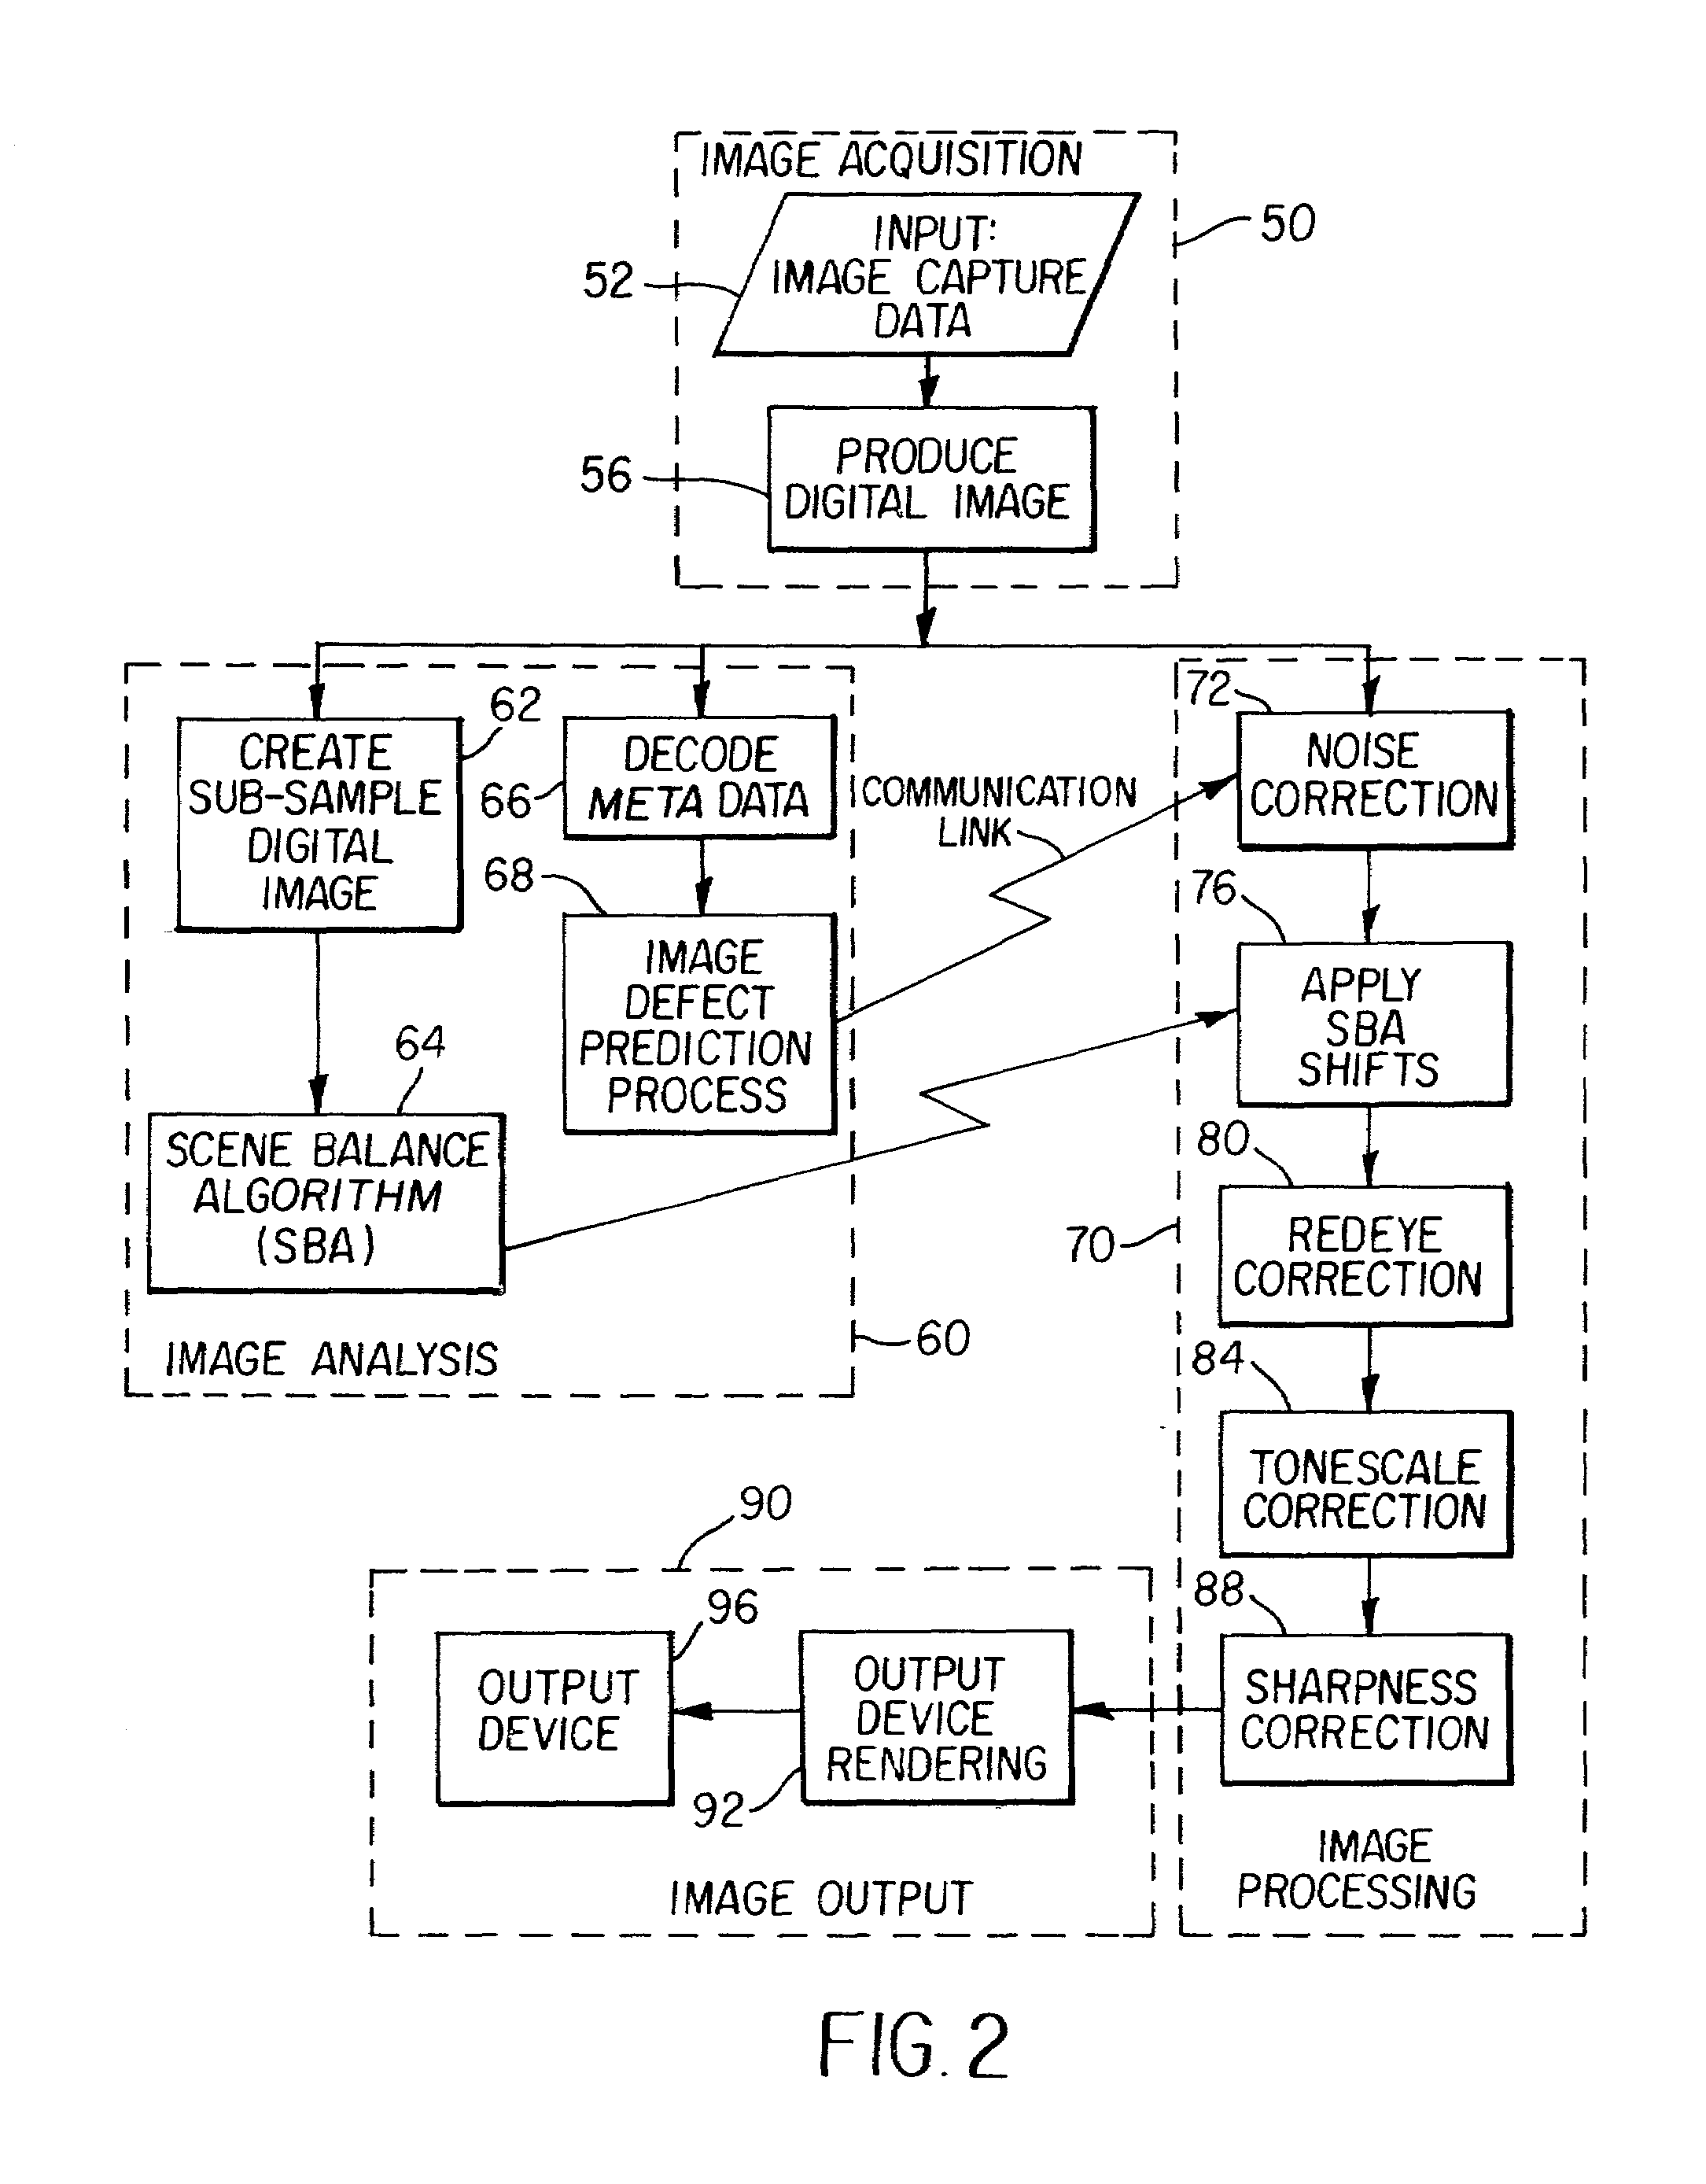 System and method for deciding when to correct image-specific defects based on camera, scene, display and demographic data